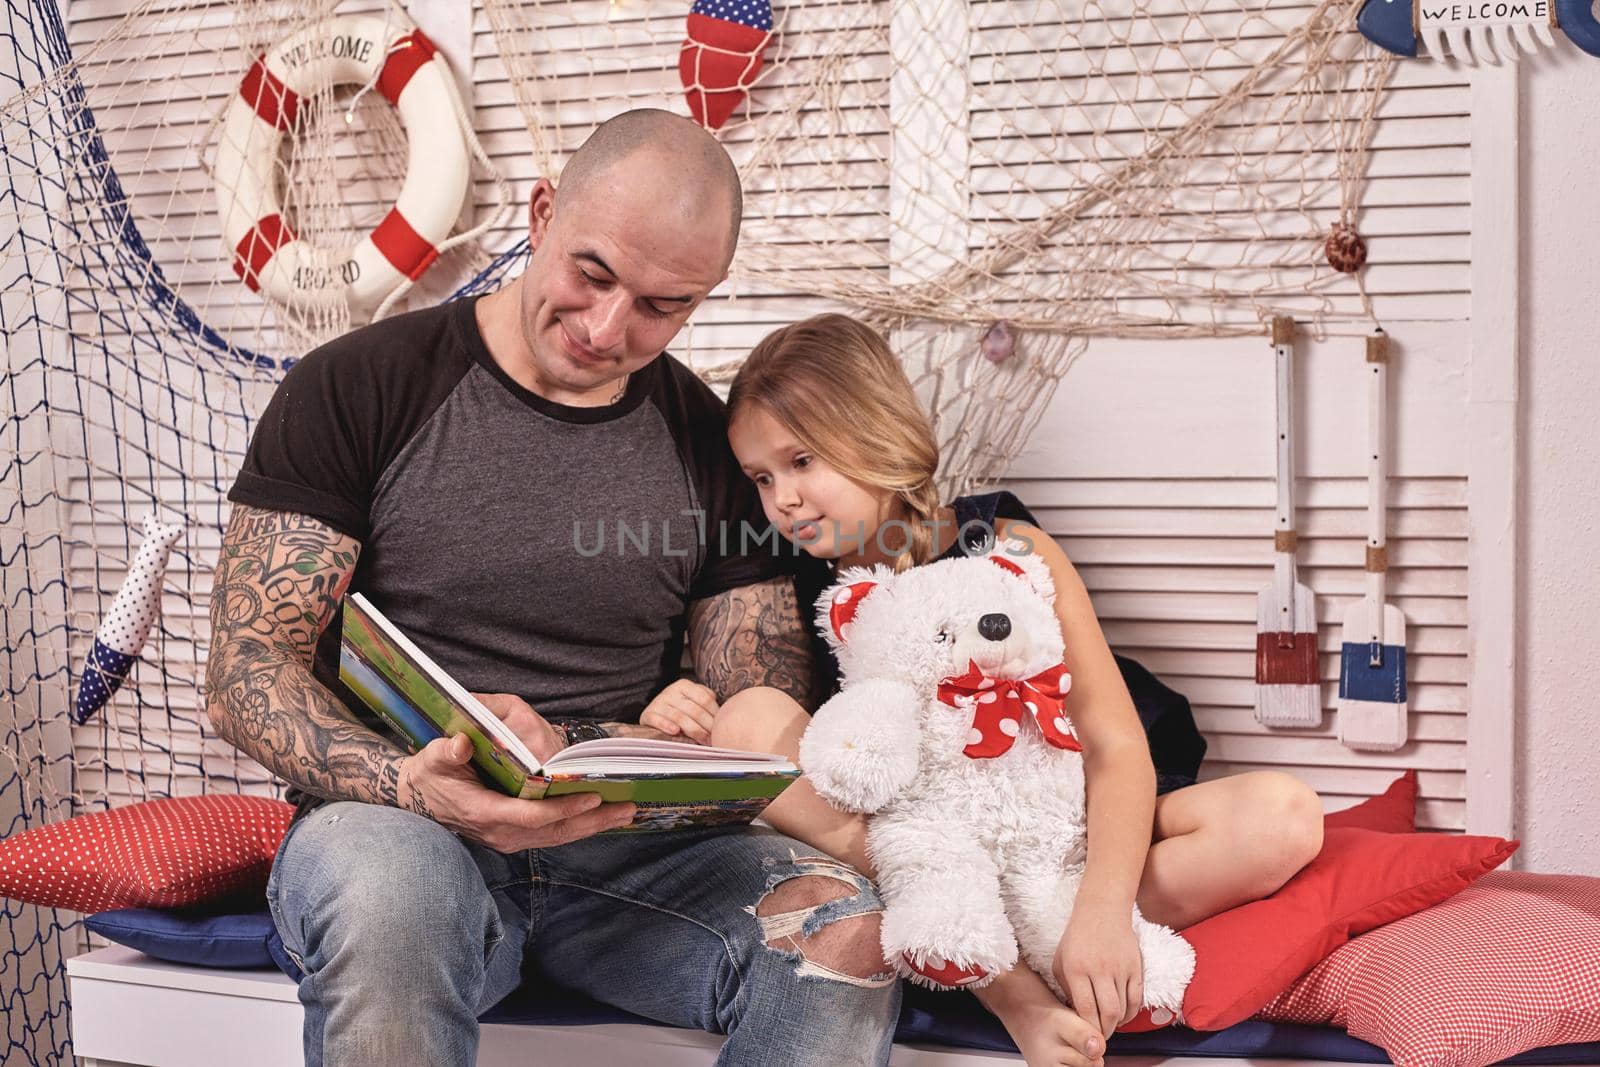 Bald tattoed man in a cap is spending time with his little cute daughter. They are sitting on a white bench with some red pillows, in a room decorated in a marine style. She is holding a toy bear. Reading fairytales while daughter is sitting nearby. Happy family.